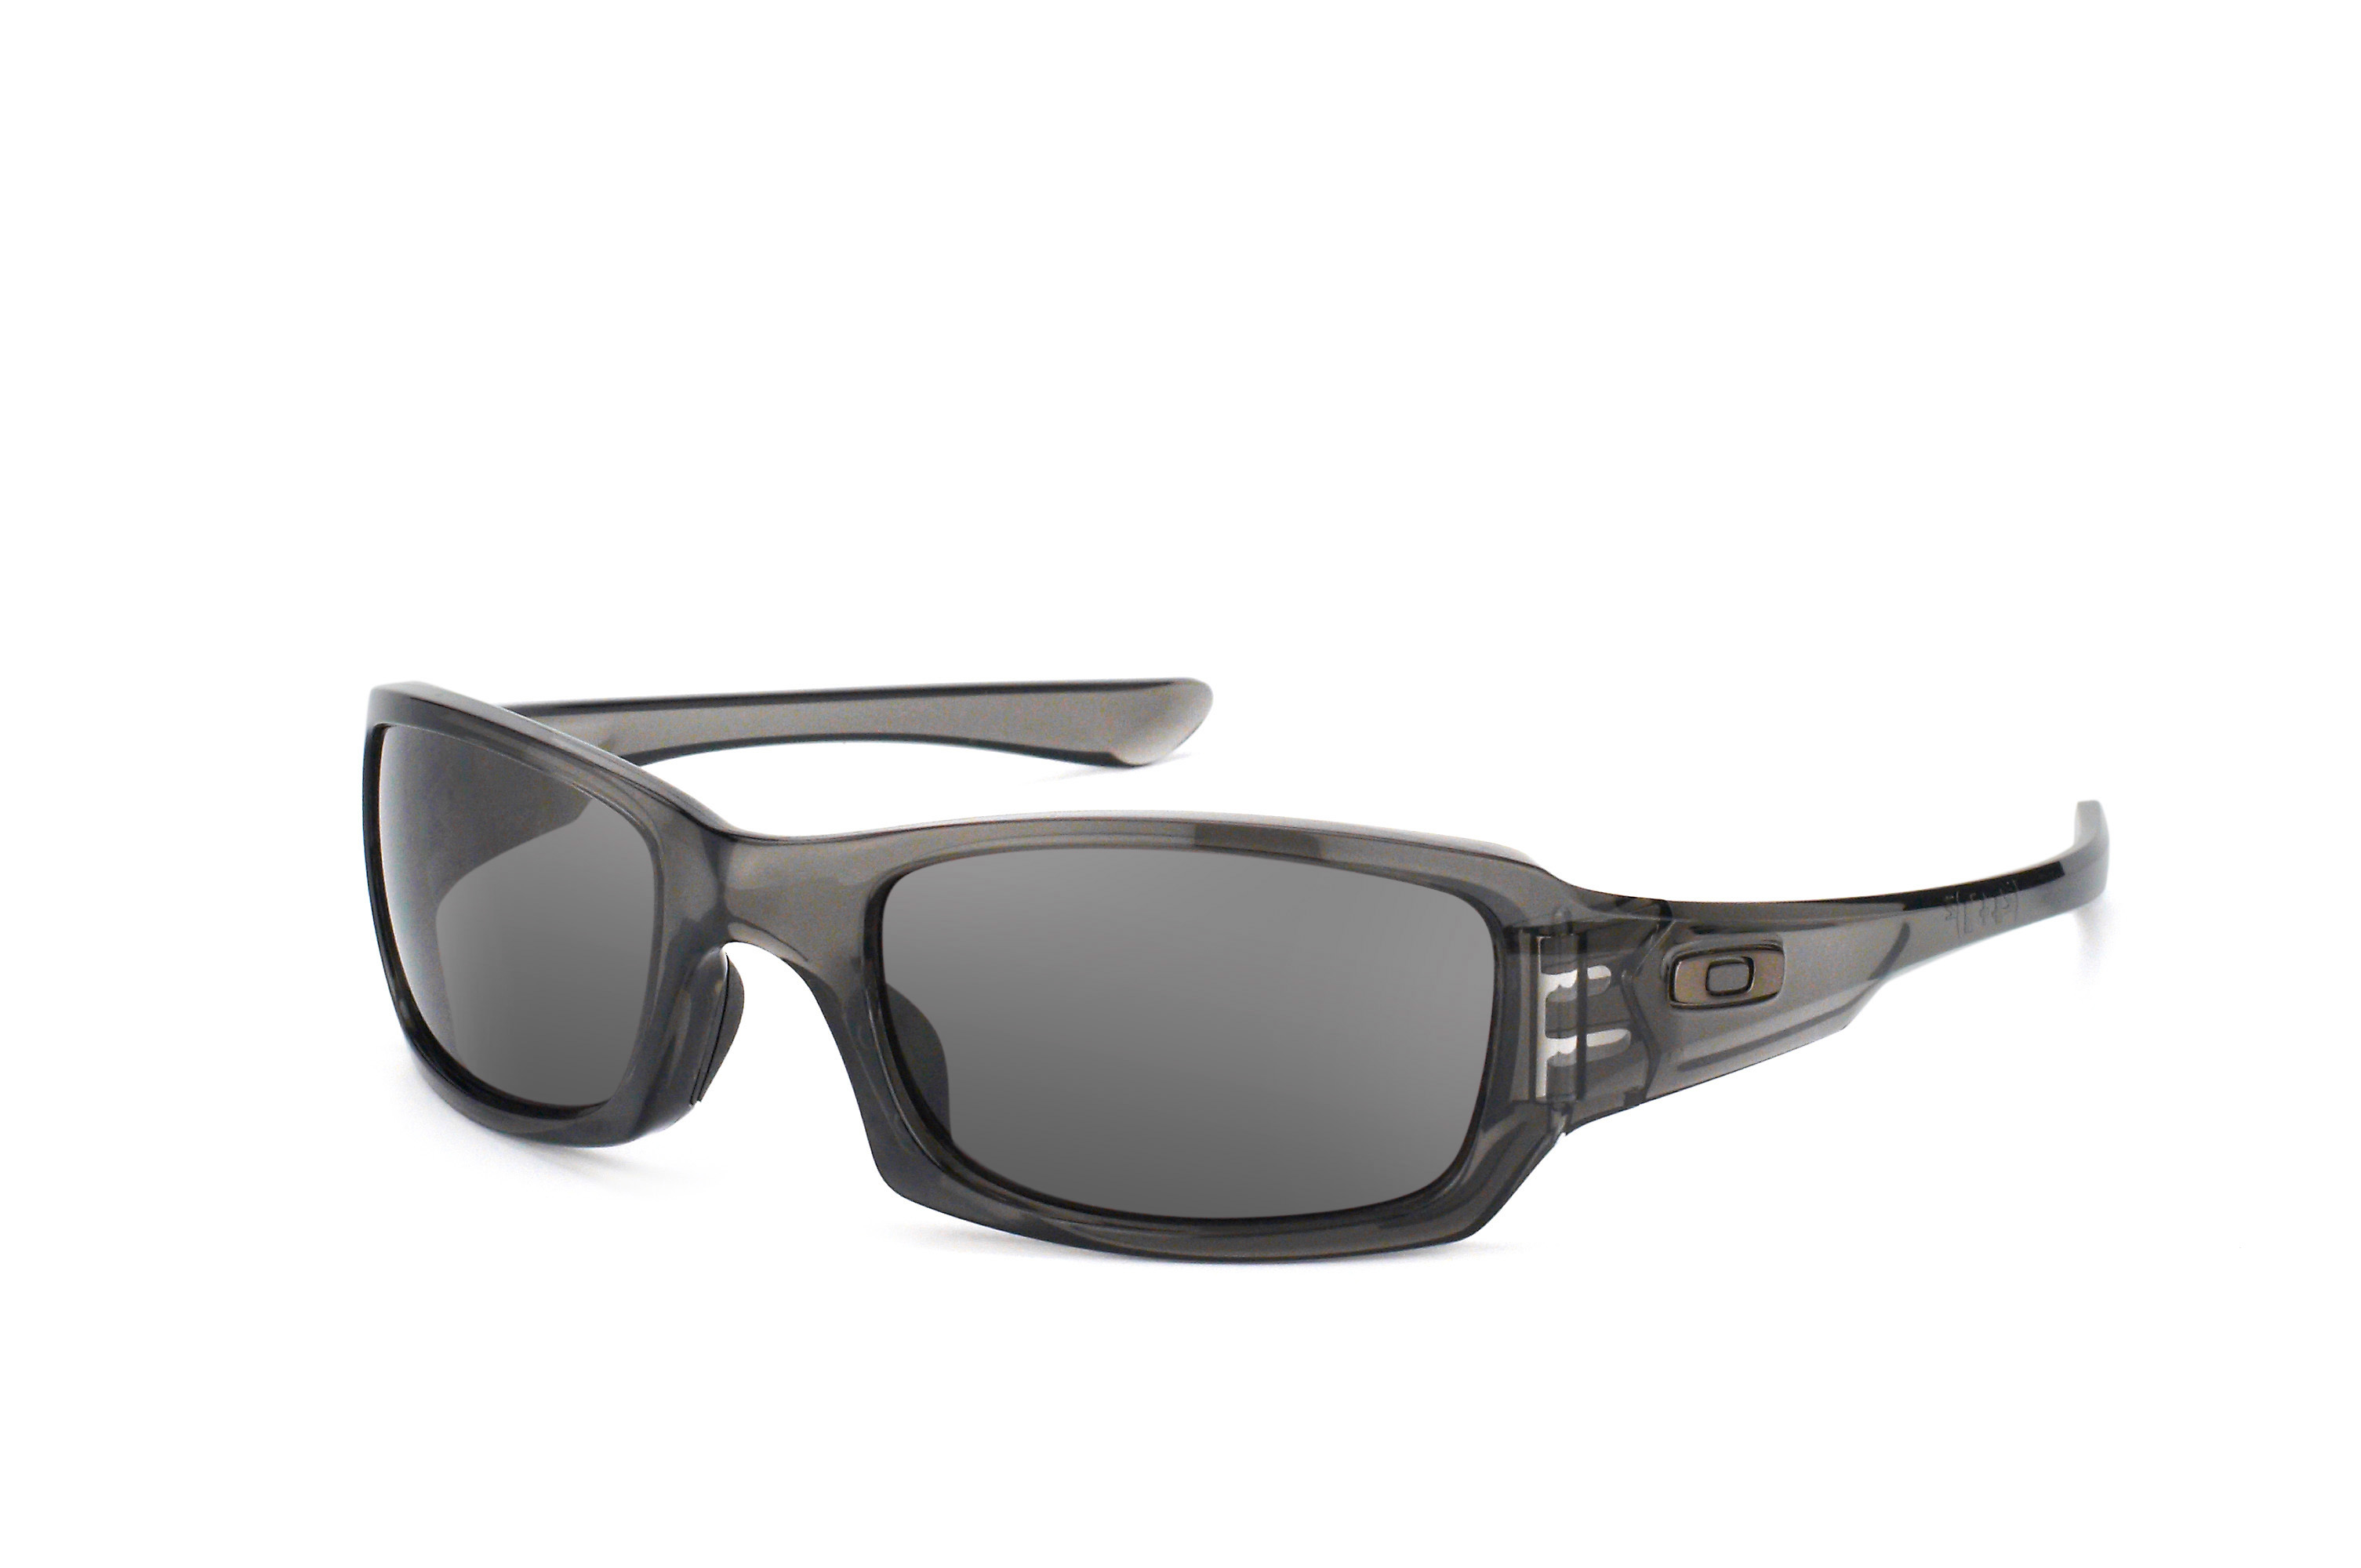 Buy Oakley Fives Squared OO 9238 05 Sunglasses